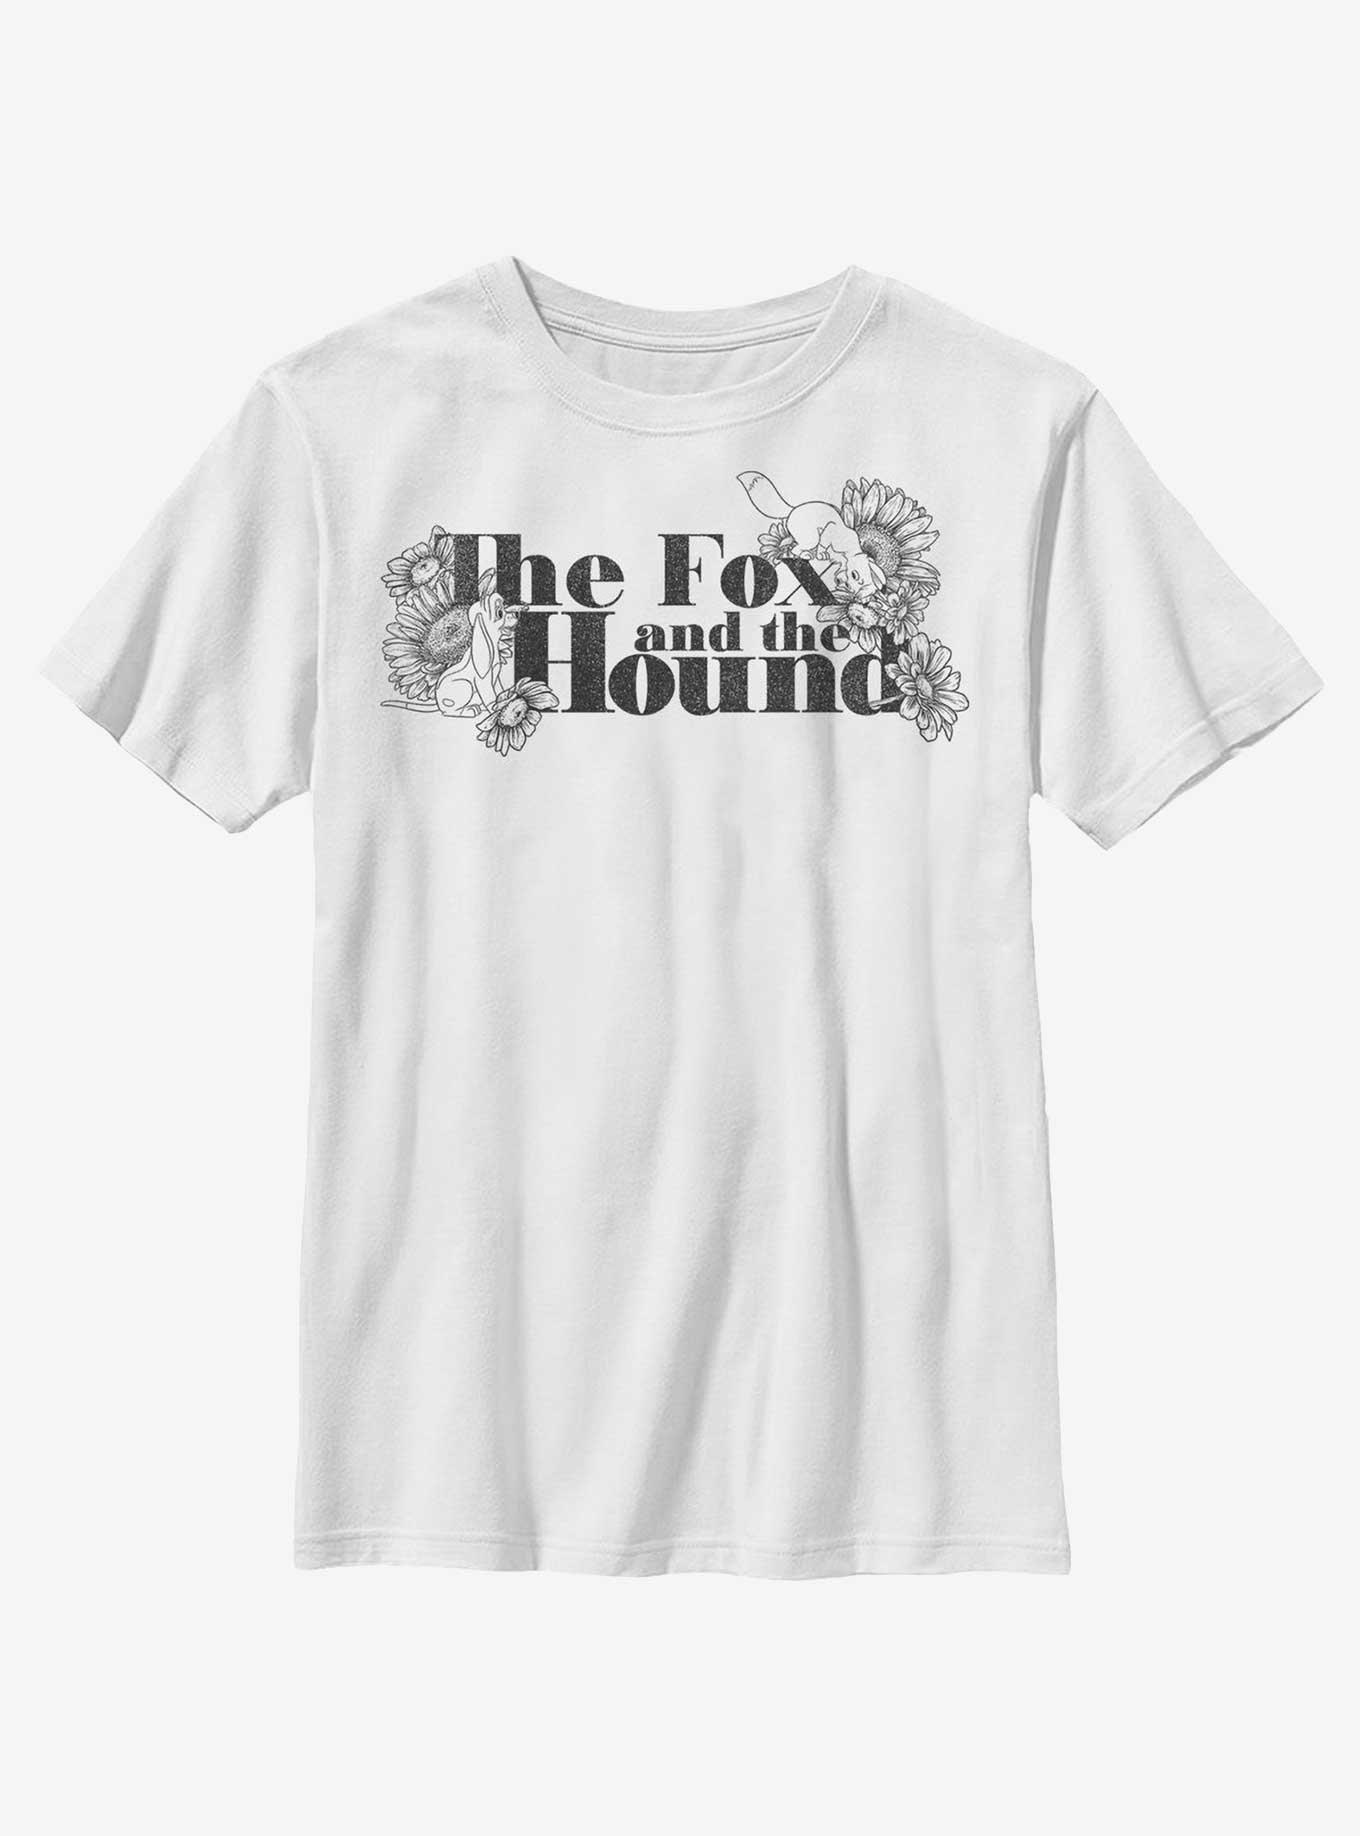 Disney The Fox and the Hound Floral Logo Youth T-Shirt, WHITE, hi-res